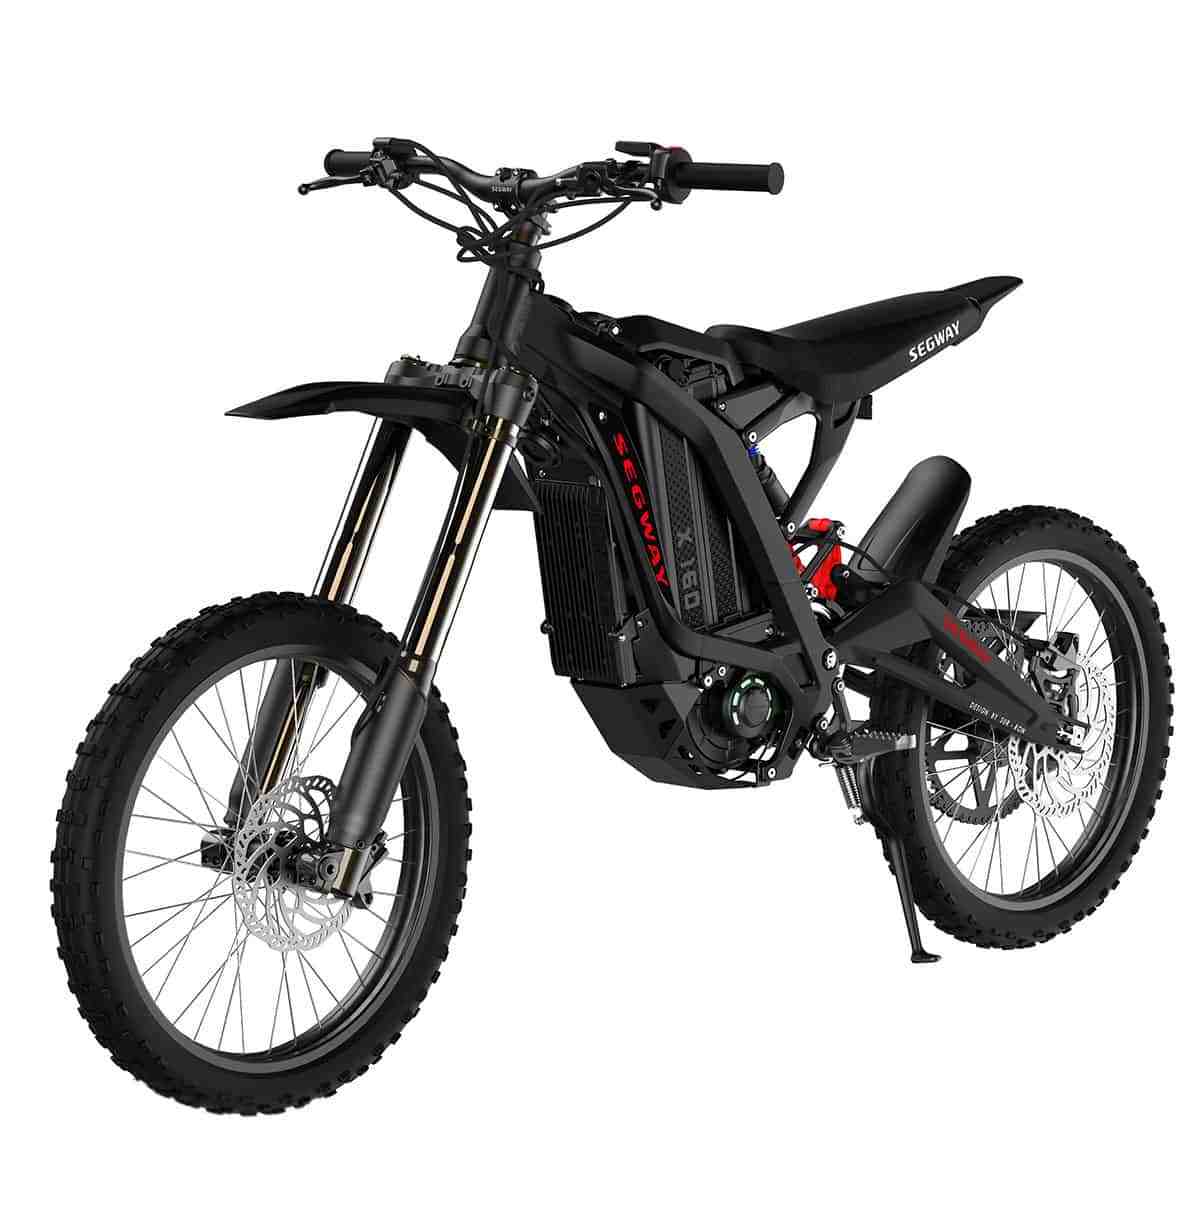 How much is the electric dirt bike?